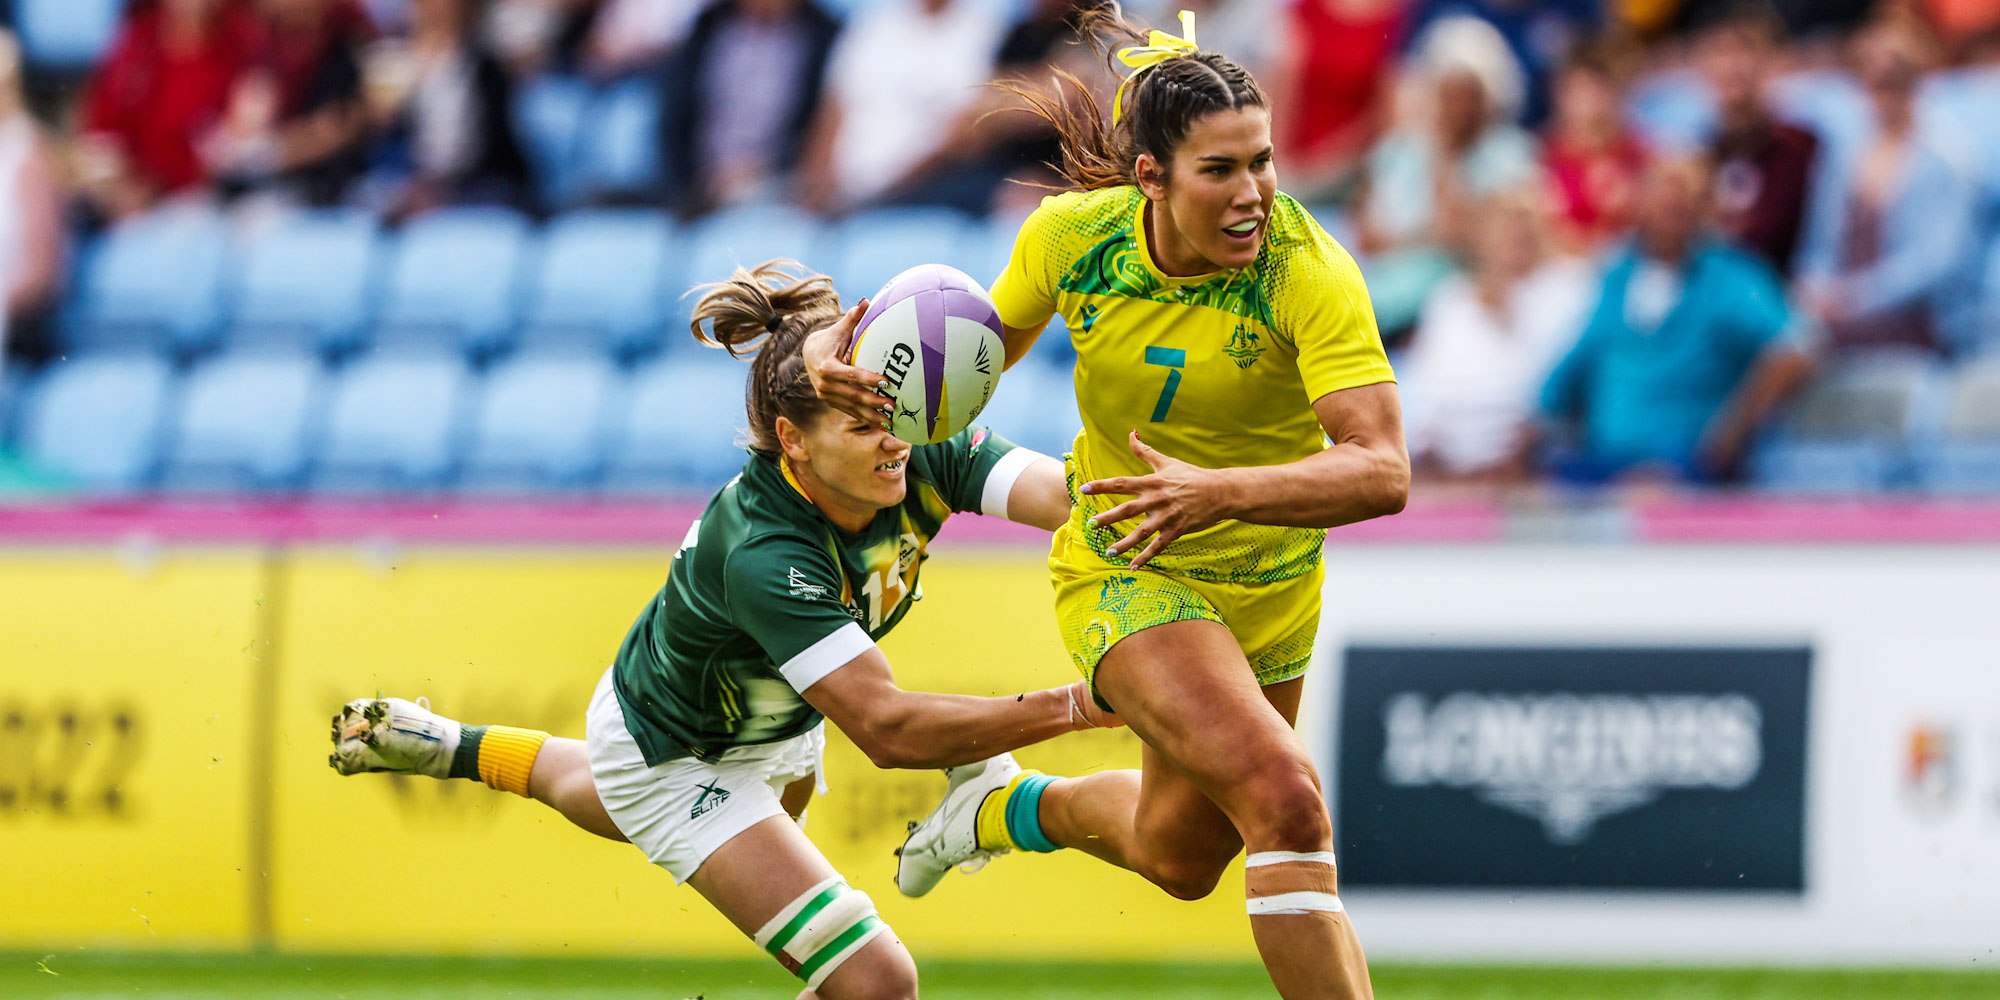 Australia had a strong start, but the SA Women did well in the second half of their clash on Friday.